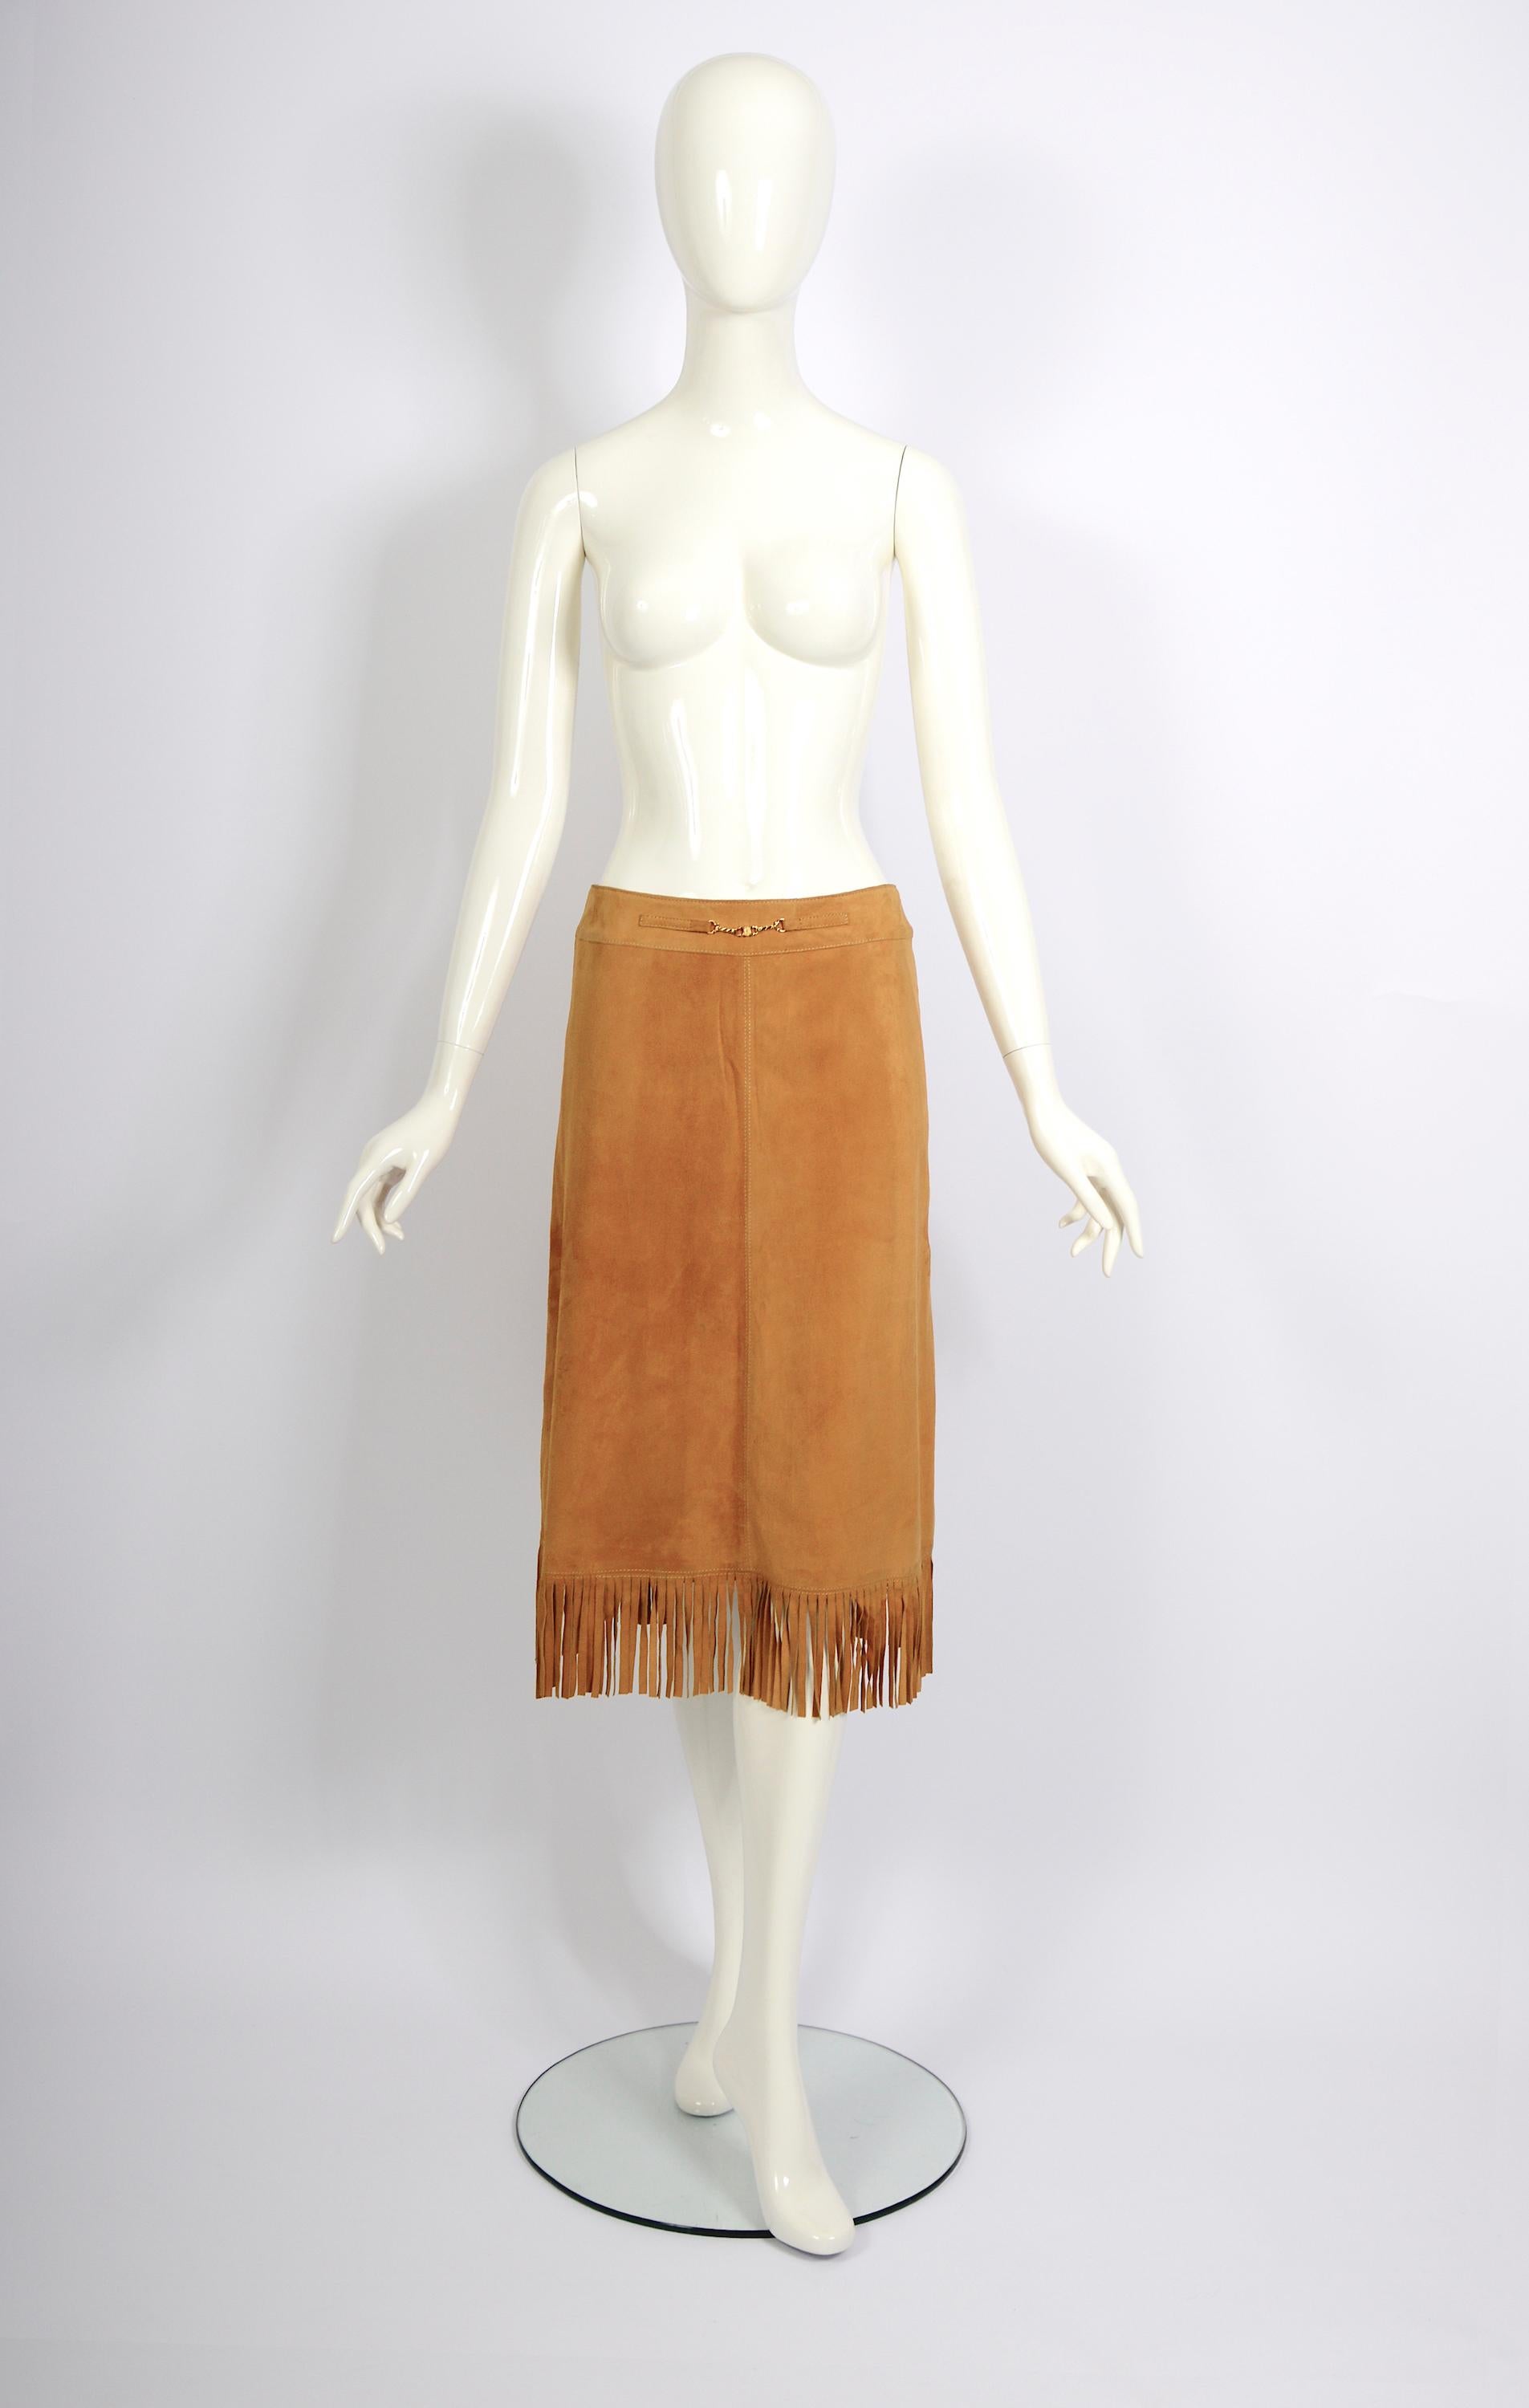 Céline Paris fringed suede skirt from the 1970s. It's an A-line low waist style, lined with the Celine signature printed on the viscose fabric.
While the tag indicates a size 40, it is worth noting that our mannequin is a size 36. The A-line